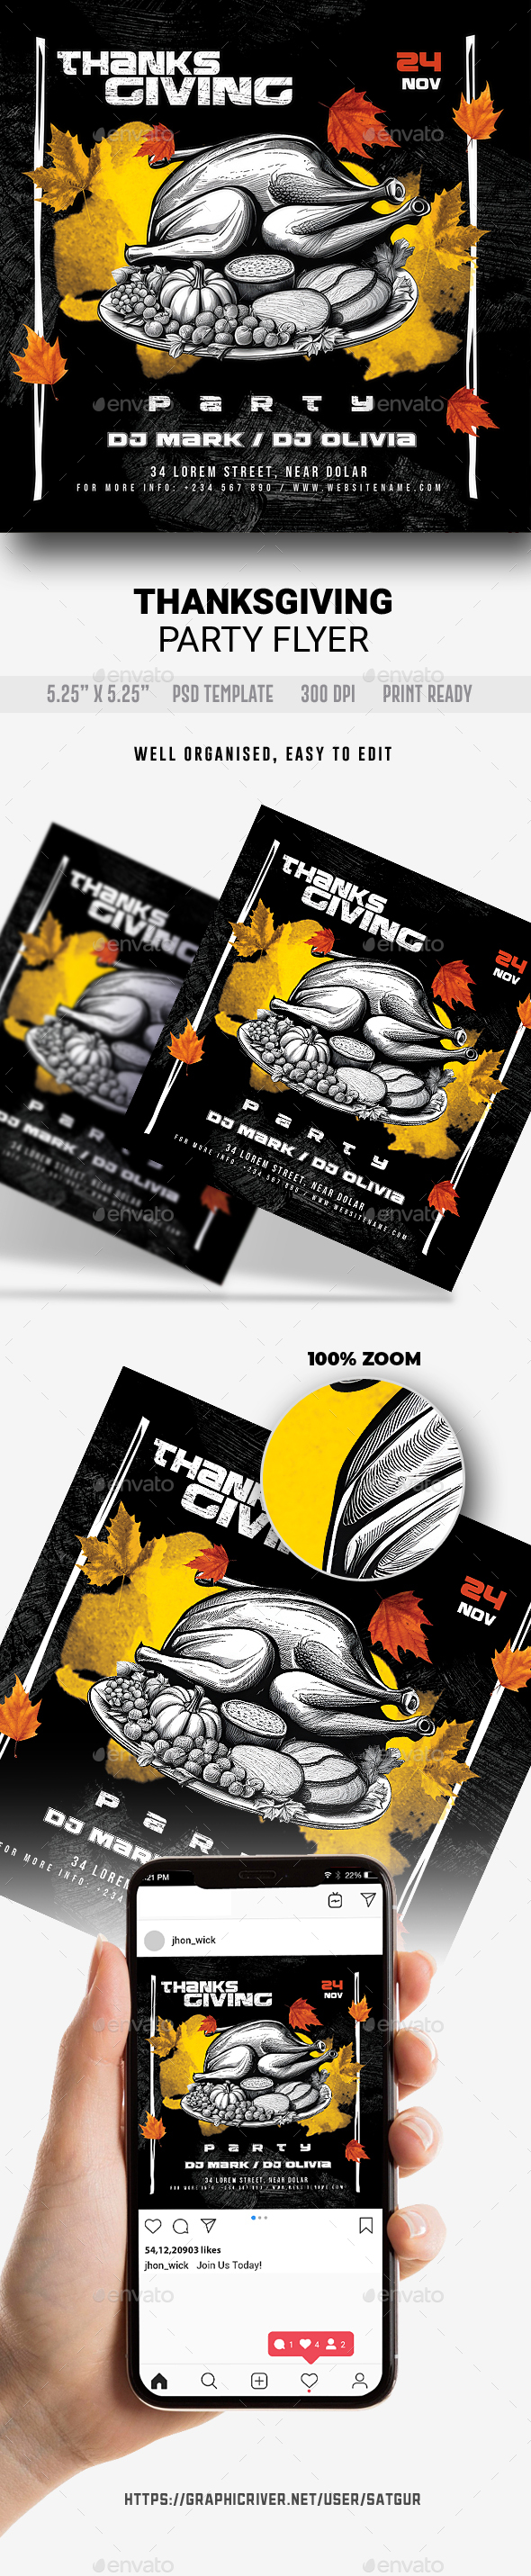 Thanksgiving Party Flyer Template PSD